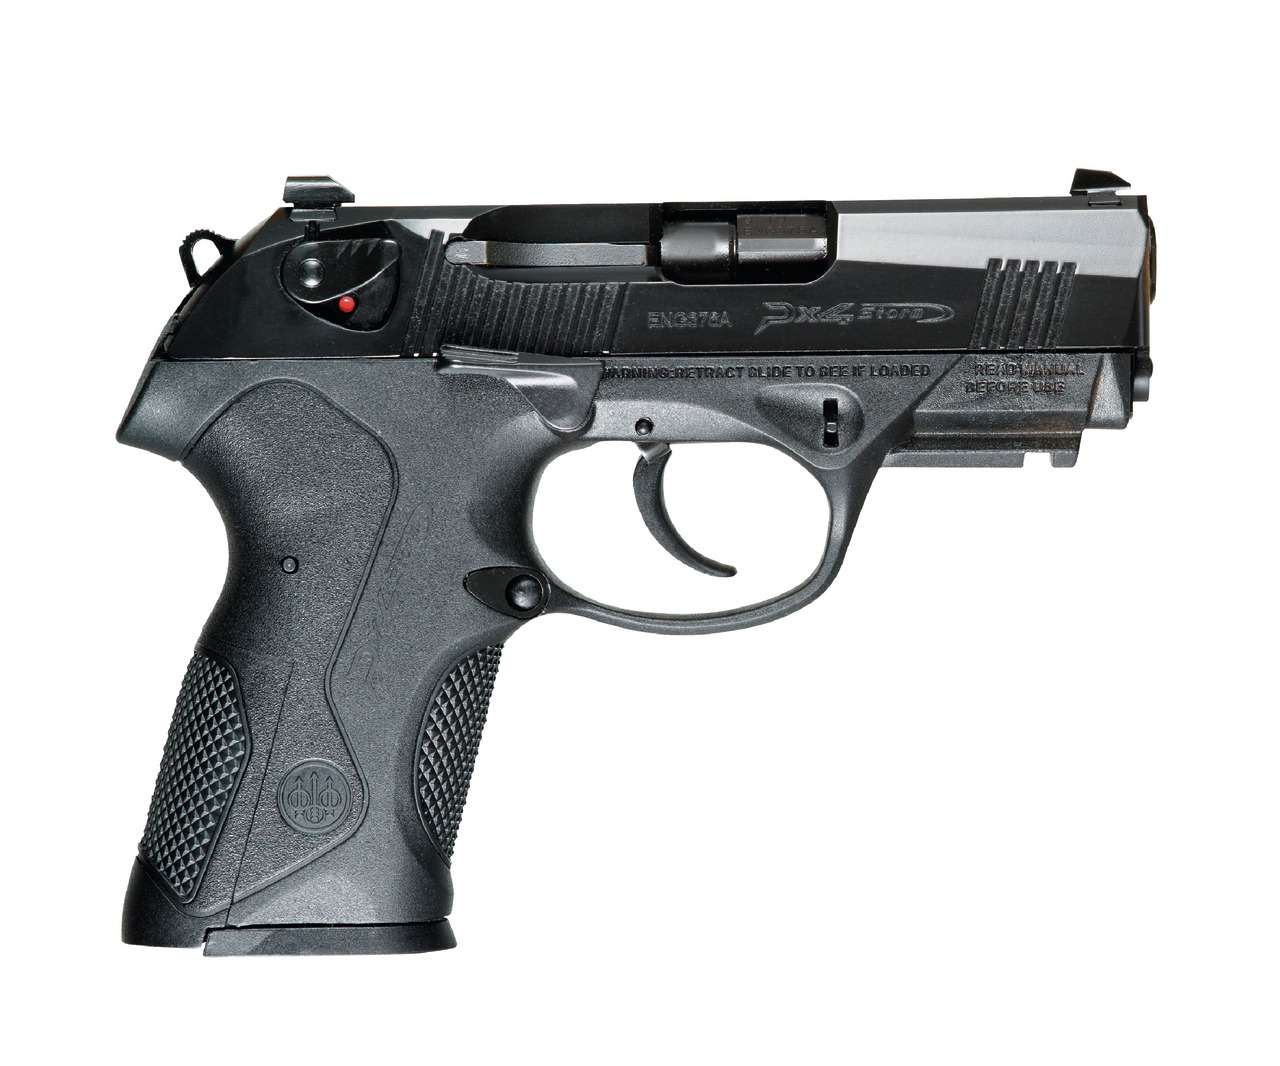 PIST BERE PX4 COMPACT F 9MM PARA  15 coups